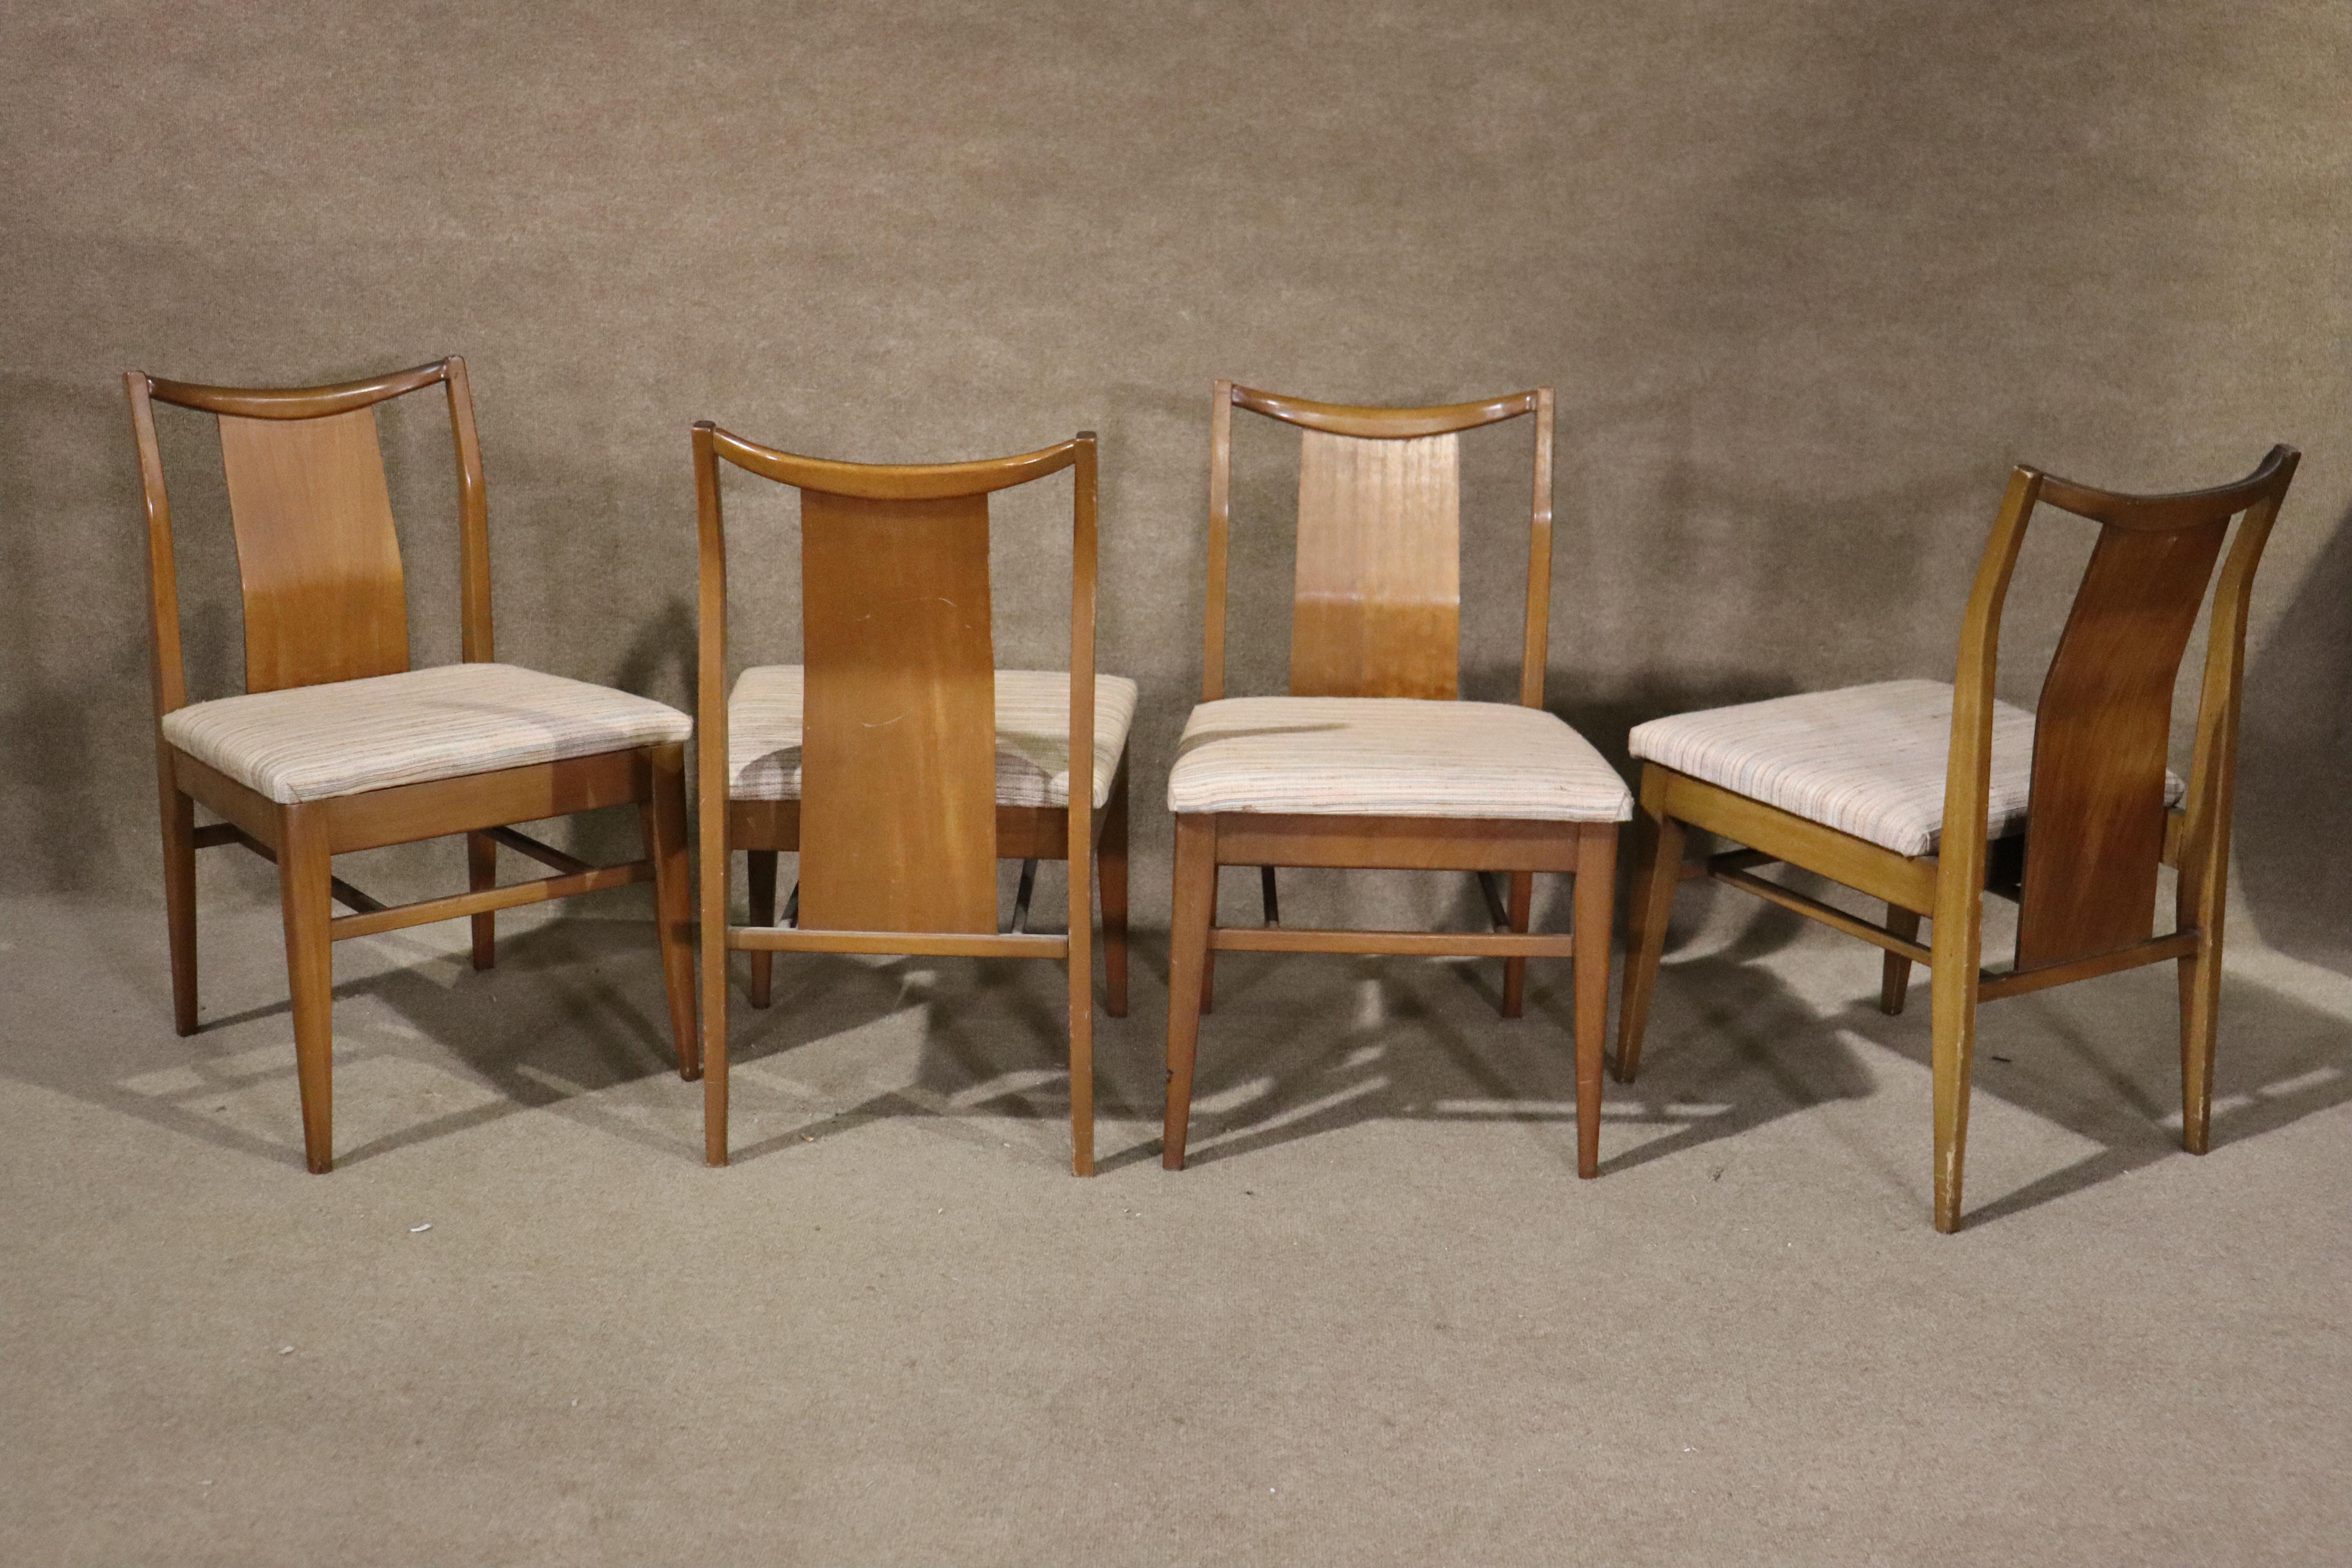 These vintage chairs in walnut are from the 1960s and have great mid-century style and form. Bent backs with sculpted frames.
Arm chair: 32h, 23w, 22d
Side chair: 32h, 19w, 21d
Please confirm location NY or NJ